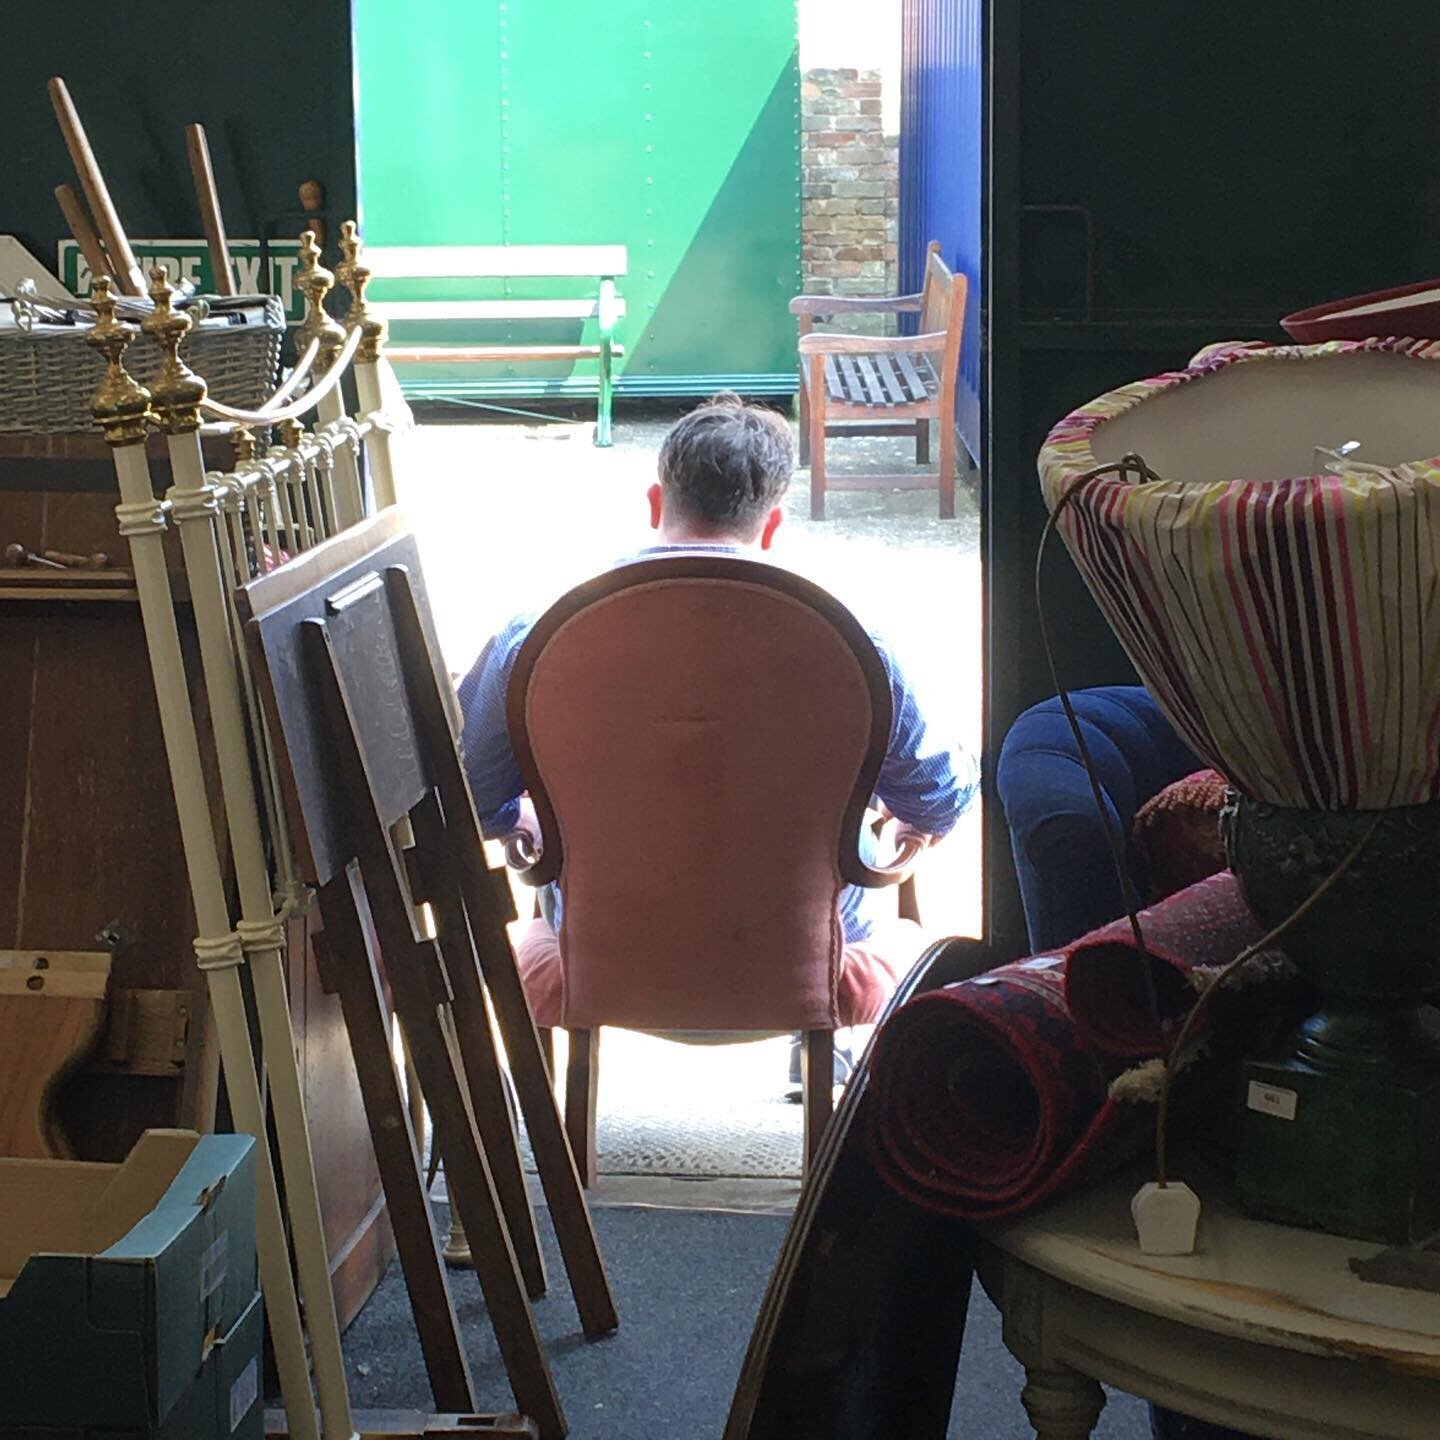 Another long week over, the 31st July Antiques Interiors and Collectables auction cataloguing finished and the catalogue is now online. James having a very well deserved contemplative rest. #auction #sale #auctionhouse #auctioneer #antique  #decorati